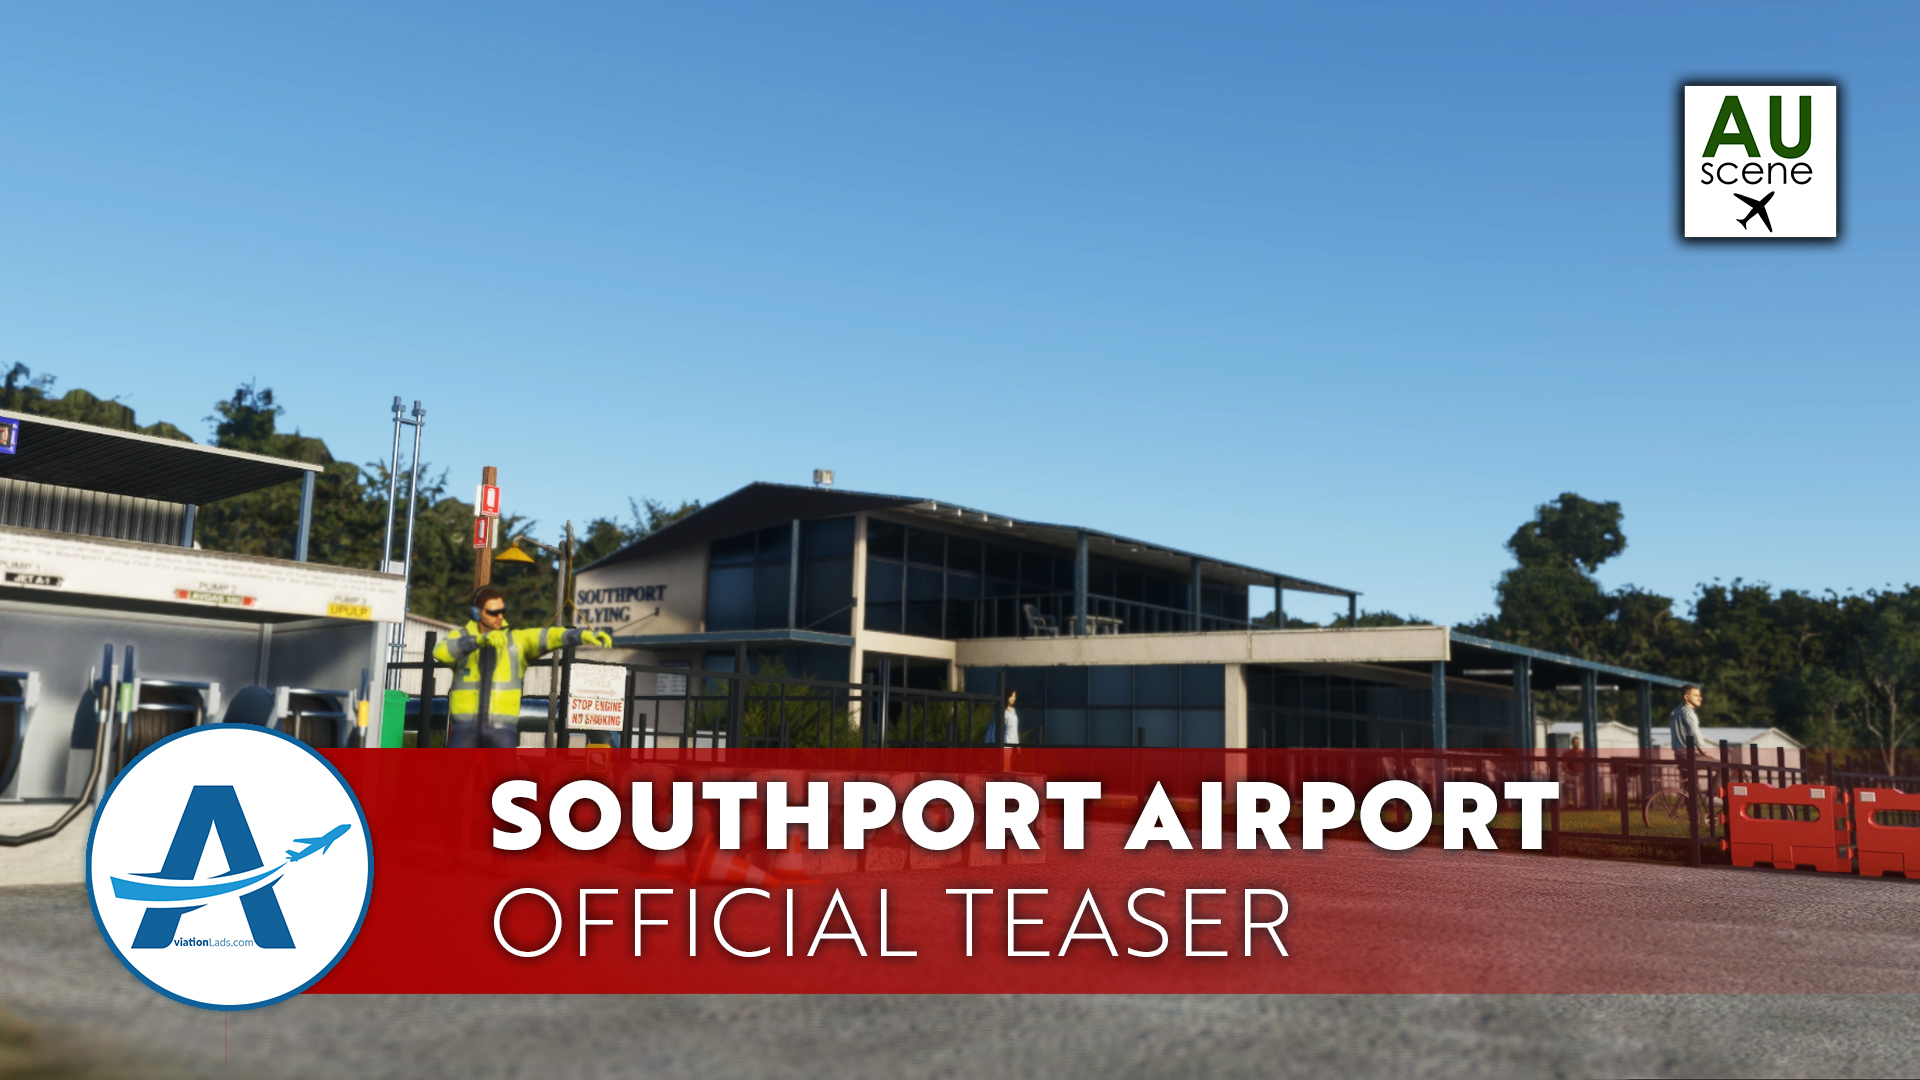 [TEASER] AUscene – Southport Airport